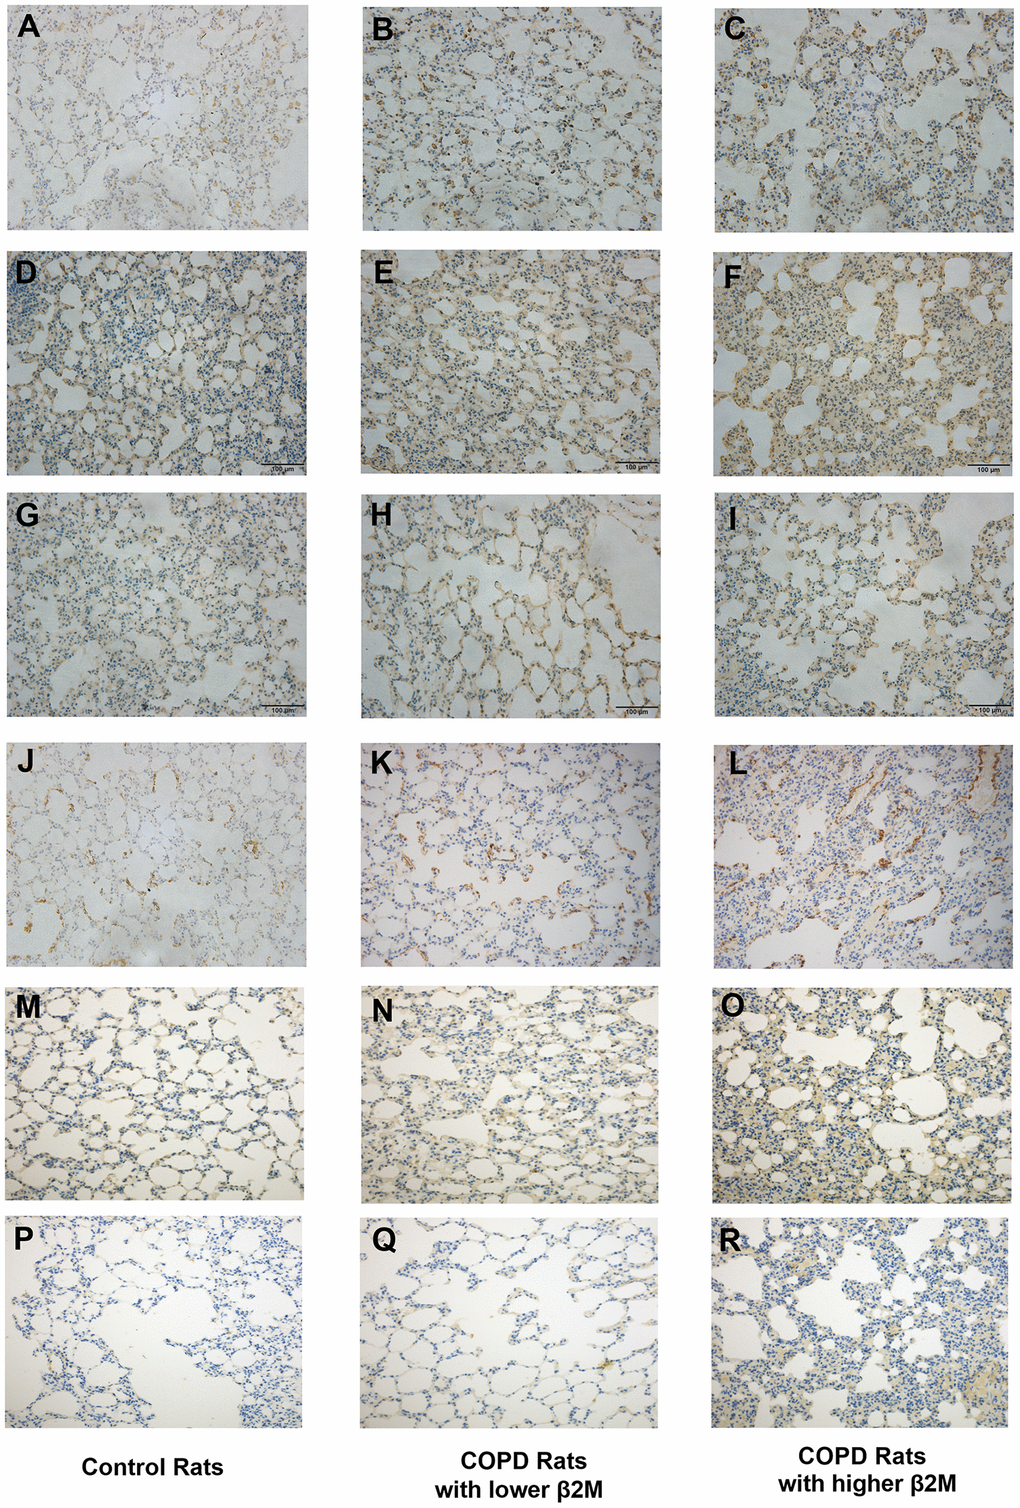 Immunohistochemical staining of lung tissue from rats. Lung tissue of control rats including (A, D, G, J, M, P); lung tissue of COPD rats with lower β2M including (B, E, H, K, N, Q); lung tissue of COPD rats with higher β2M including (C, F, I, L, O, R). Indicators and positive cell rate: (A–C) Representative image of β2M immunohistochemical staining of lung tissue from control rats (7.29 ± 1.65%), COPD rats with lower β2M (14.39 ± 2.17%) and COPD rats with higher β2M (21.21 ± 2.56%) respectively. (D–F) Representative image of TGF-β1 immunohistochemical staining of lung tissue from control rats (30.12 ± 3.24%), COPD rats with lower β2M (33.22 ± 2.87%) and COPD rats with higher β2M (37.30 ± 4.99%) respectively. (G–I) Representative image of Smad4 immunohistochemical staining of lung tissue from control rats (20.67 ± 2.25%), COPD rats with lower β2M (27.04 ± 2.99%) and COPD rats with higher β2M (29.51 ± 3.14%) respectively. (J–L) Representative image of a-SMA immunohistochemical staining of lung tissue from control rats (5.82 ± 0.57%), COPD rats with lower β2M (7.99 ± 1.35%) and COPD rats with higher β2M (9.96 ± 3.10%) respectively. (M–O) Representative image of col1 immunohistochemical staining of lung tissue from control rats (8.43 ± 2.58%), COPD rats with lower β2M (13.19 ± 7.05%) and COPD rats with higher β2M (19.67 ± 7.46%) respectively. (P–R) Representative image of col3 immunohistochemical staining of lung tissue from control rats (12.53 ± 8.96%), COPD rats with lower β2M (12.57 ± 7.06%) and COPD rats with higher β2M (22.04 ± 10.14%) respectively. The pictures show the same differential tendency (P